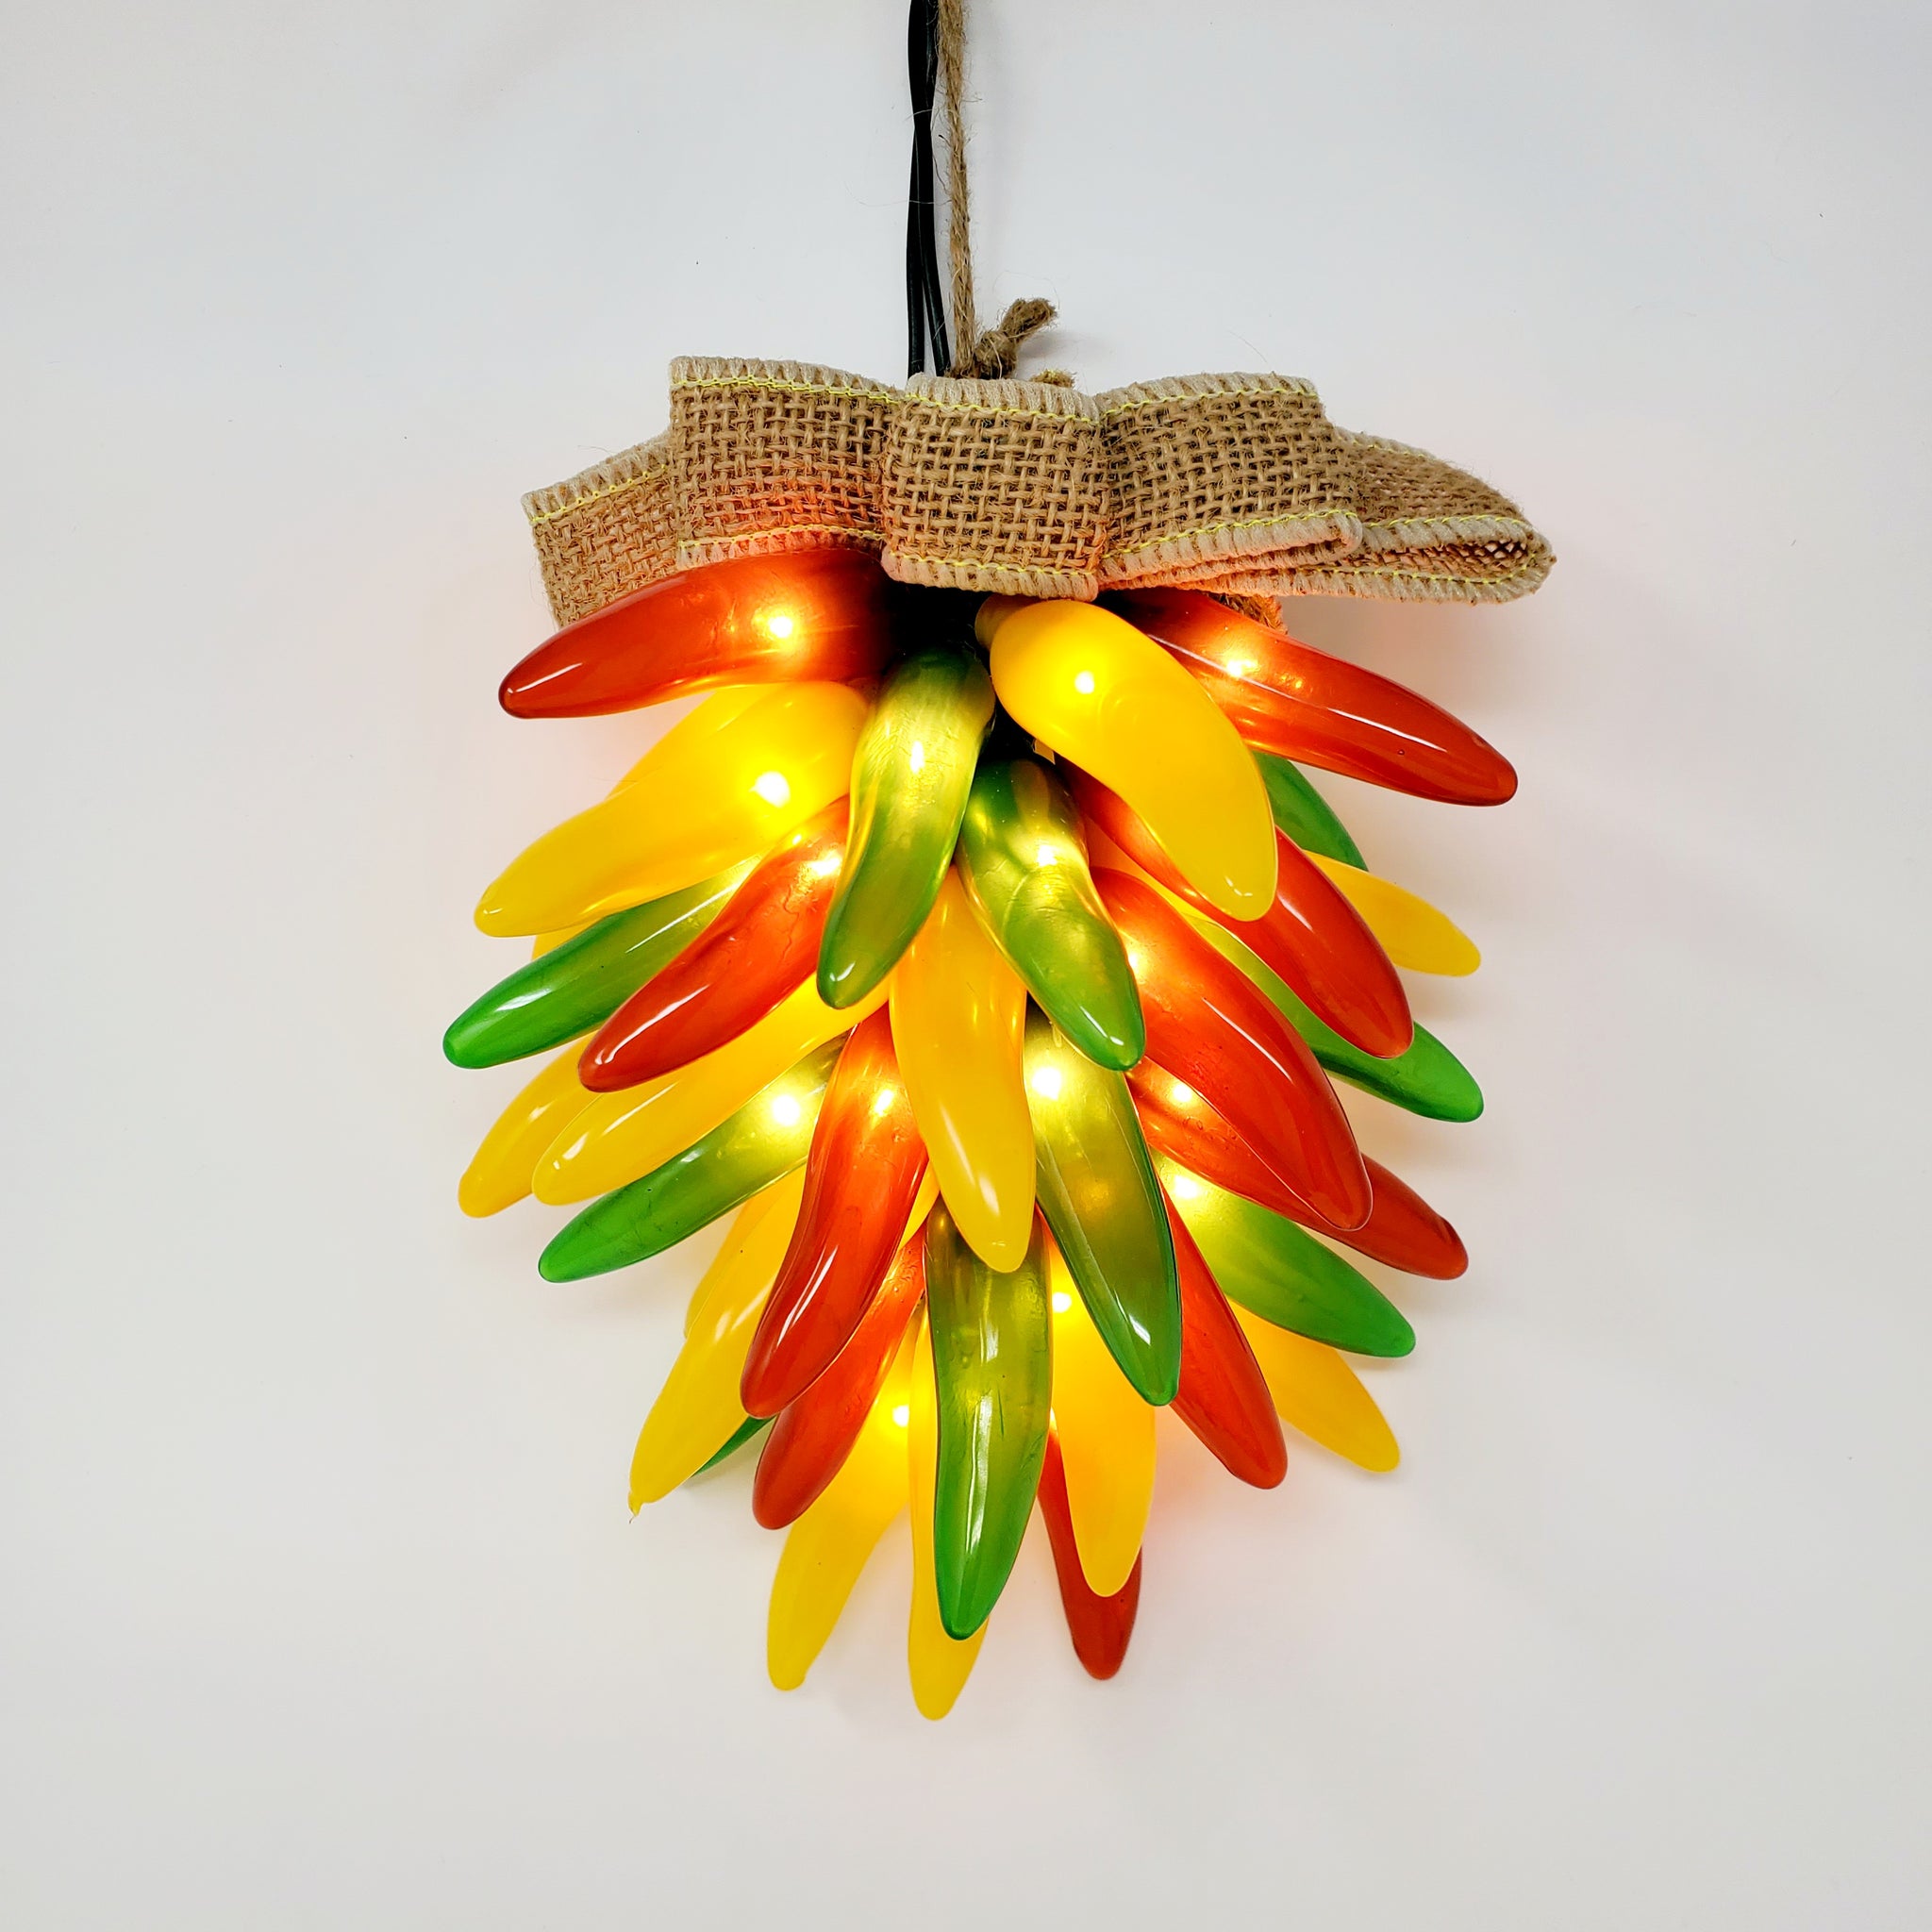 Chile Pepper Lighted Ristra - 35 Lights- Red/Green/Yellow